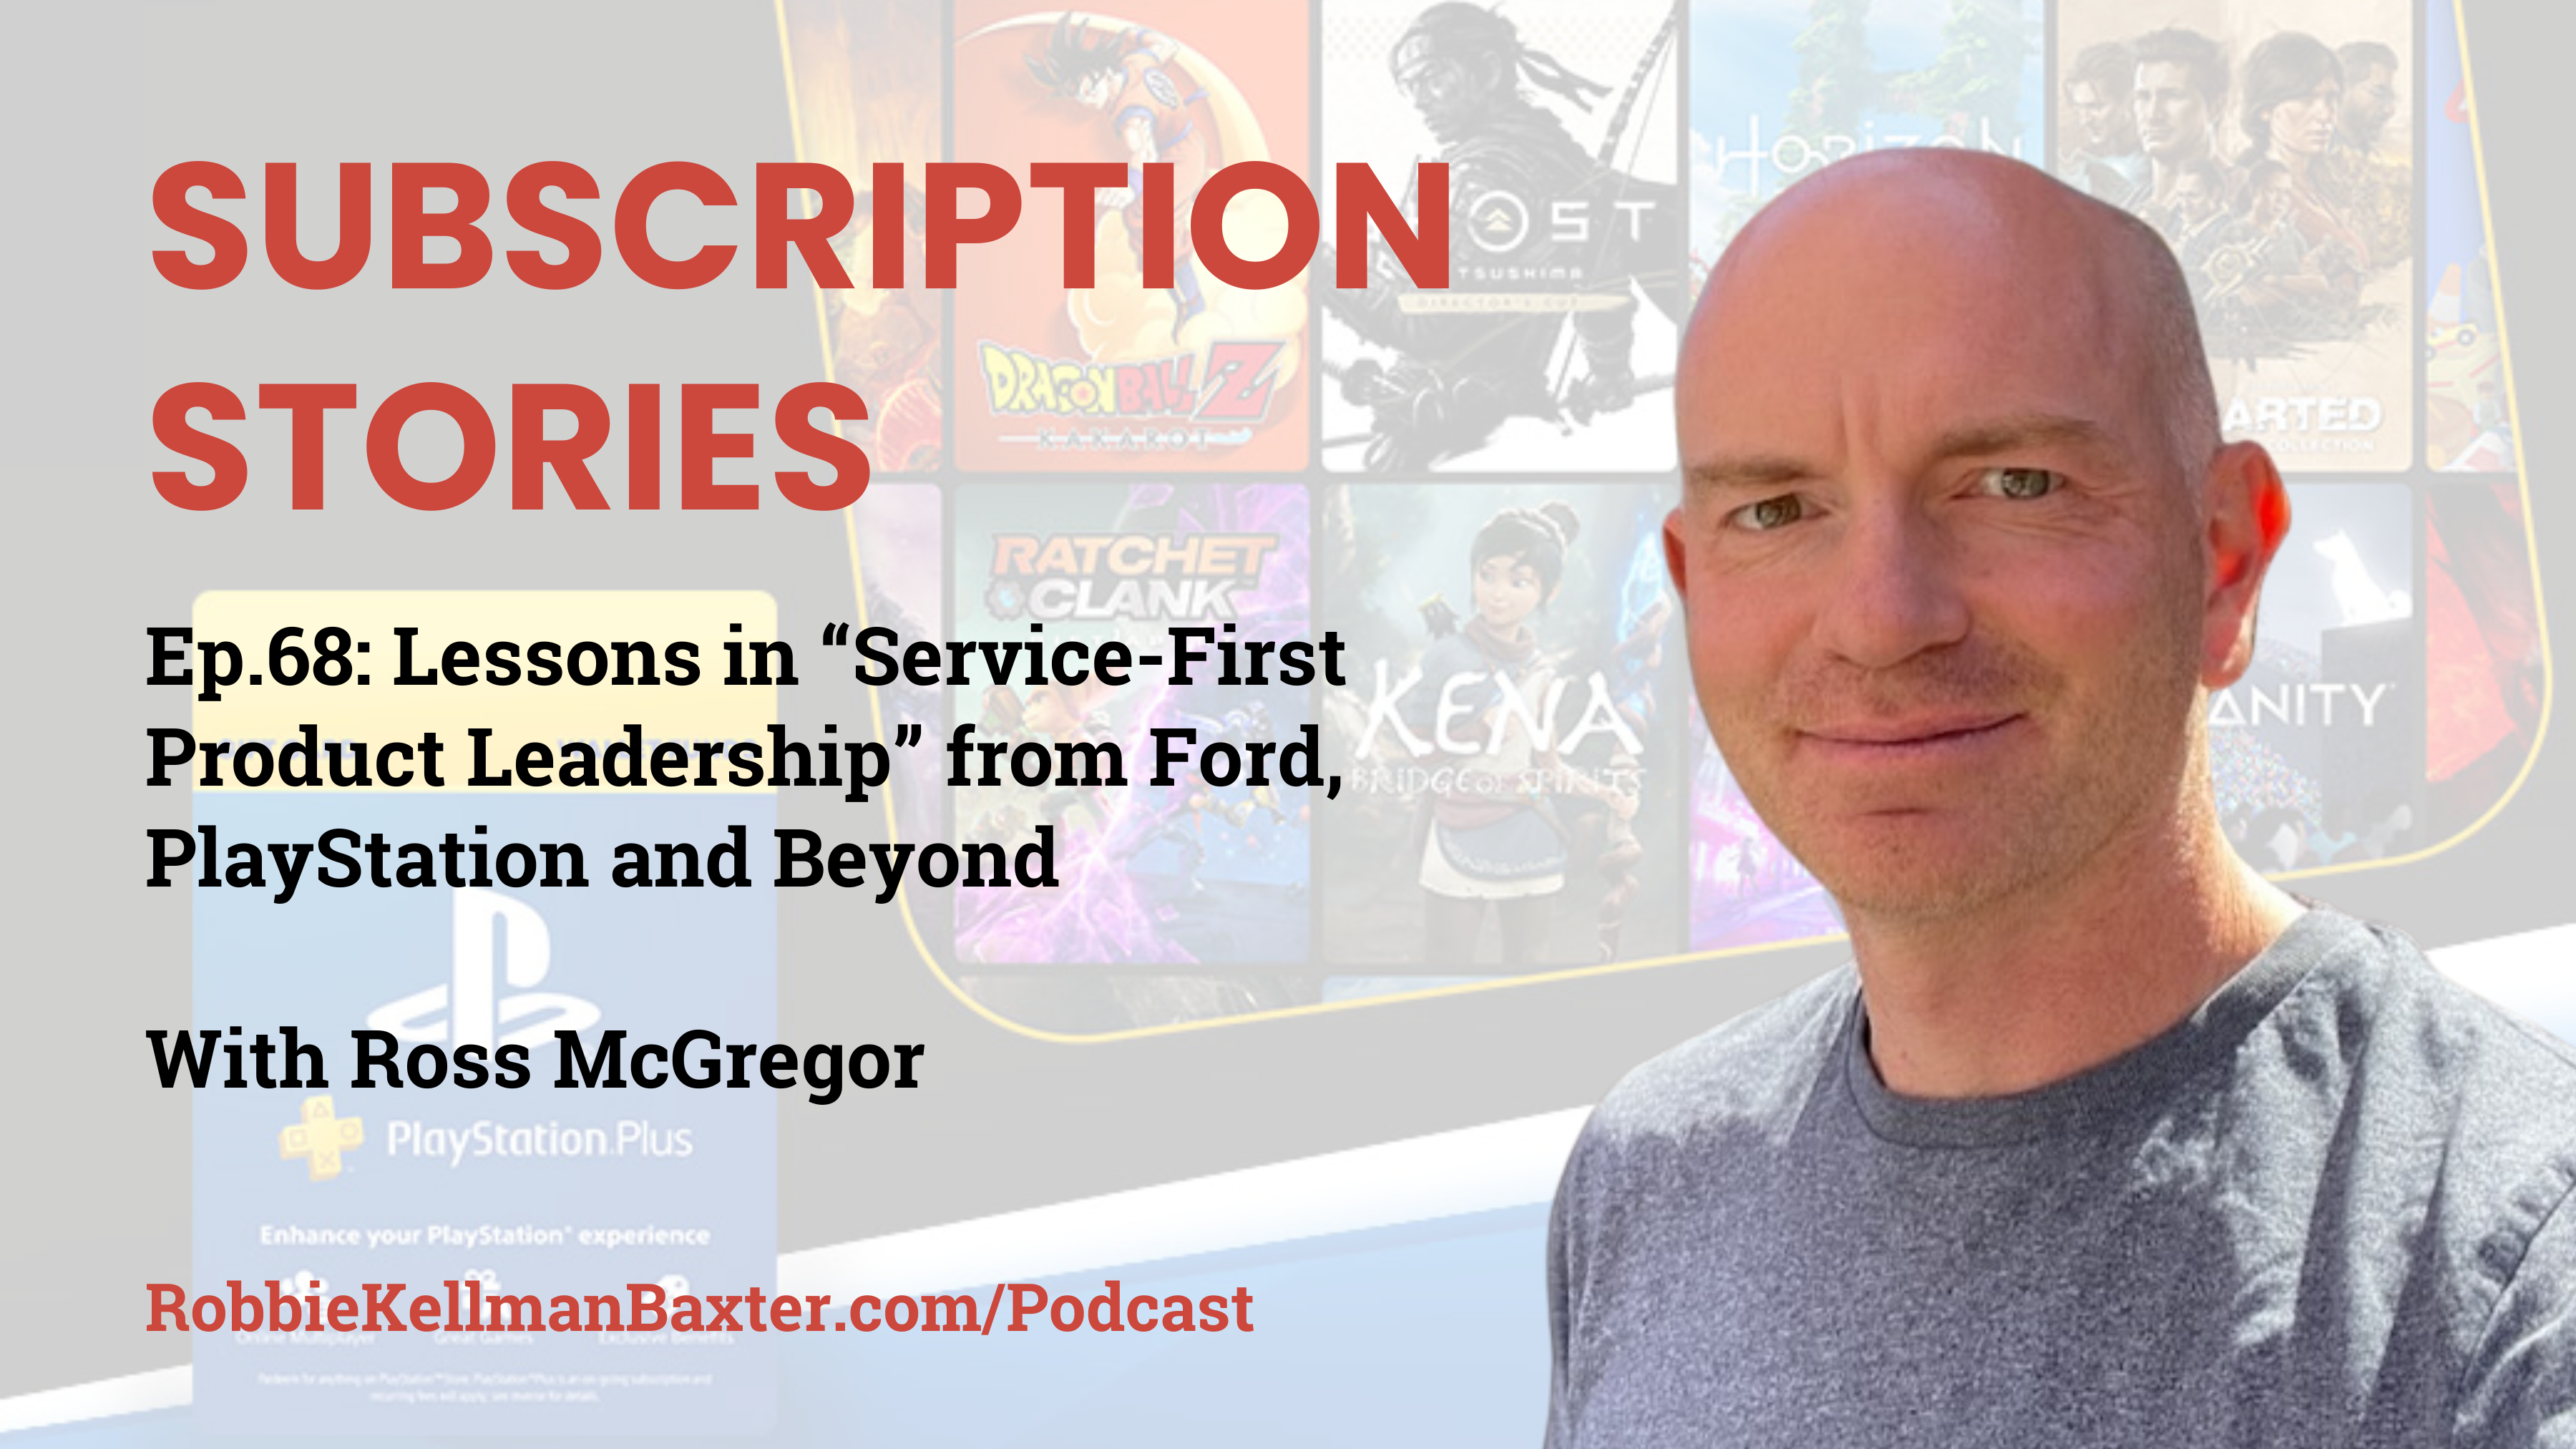 Lessons in “Service-First Product Leadership” from Ford, PlayStation and Beyond with Ross McGregor